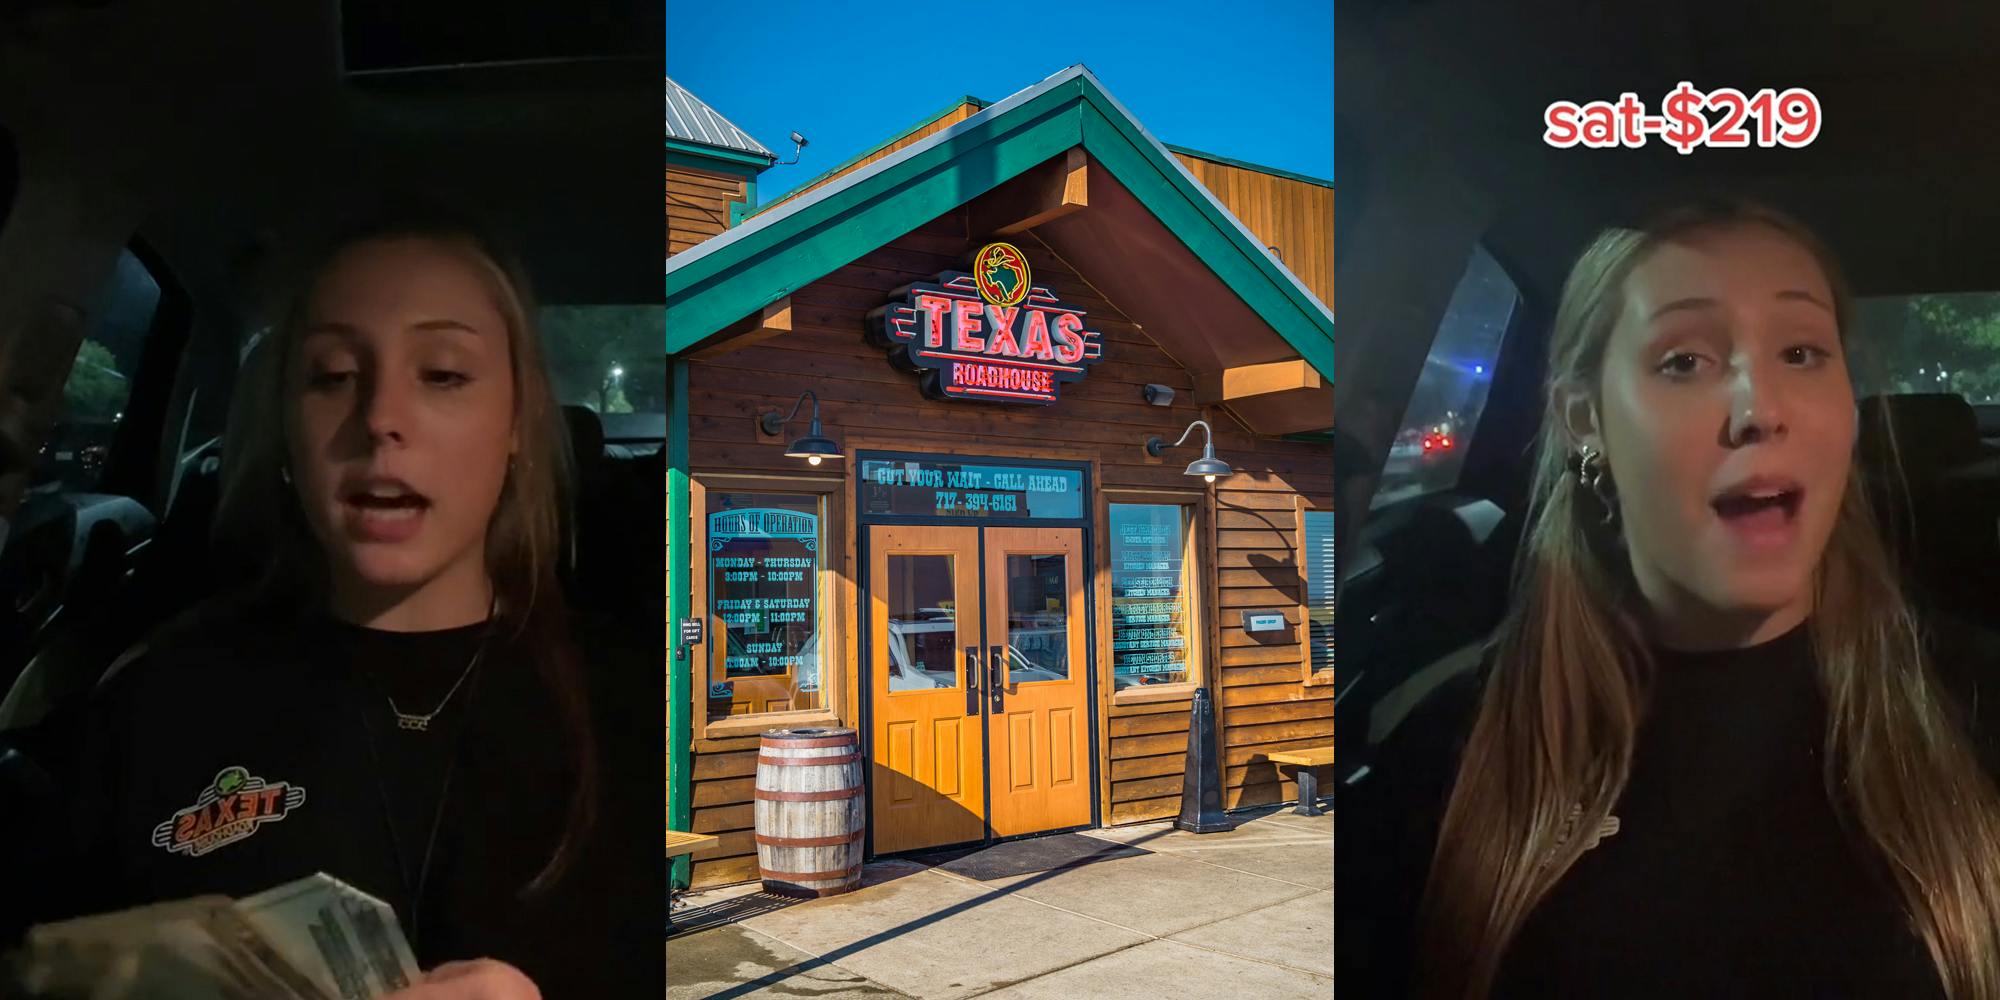 Texas Roadhouse employee counting cash in car (l) Texas Roadhouse entrance with sign and blue sky (c) Texas Roadhouse worker speaking in car with caption "sat-$219" (r)